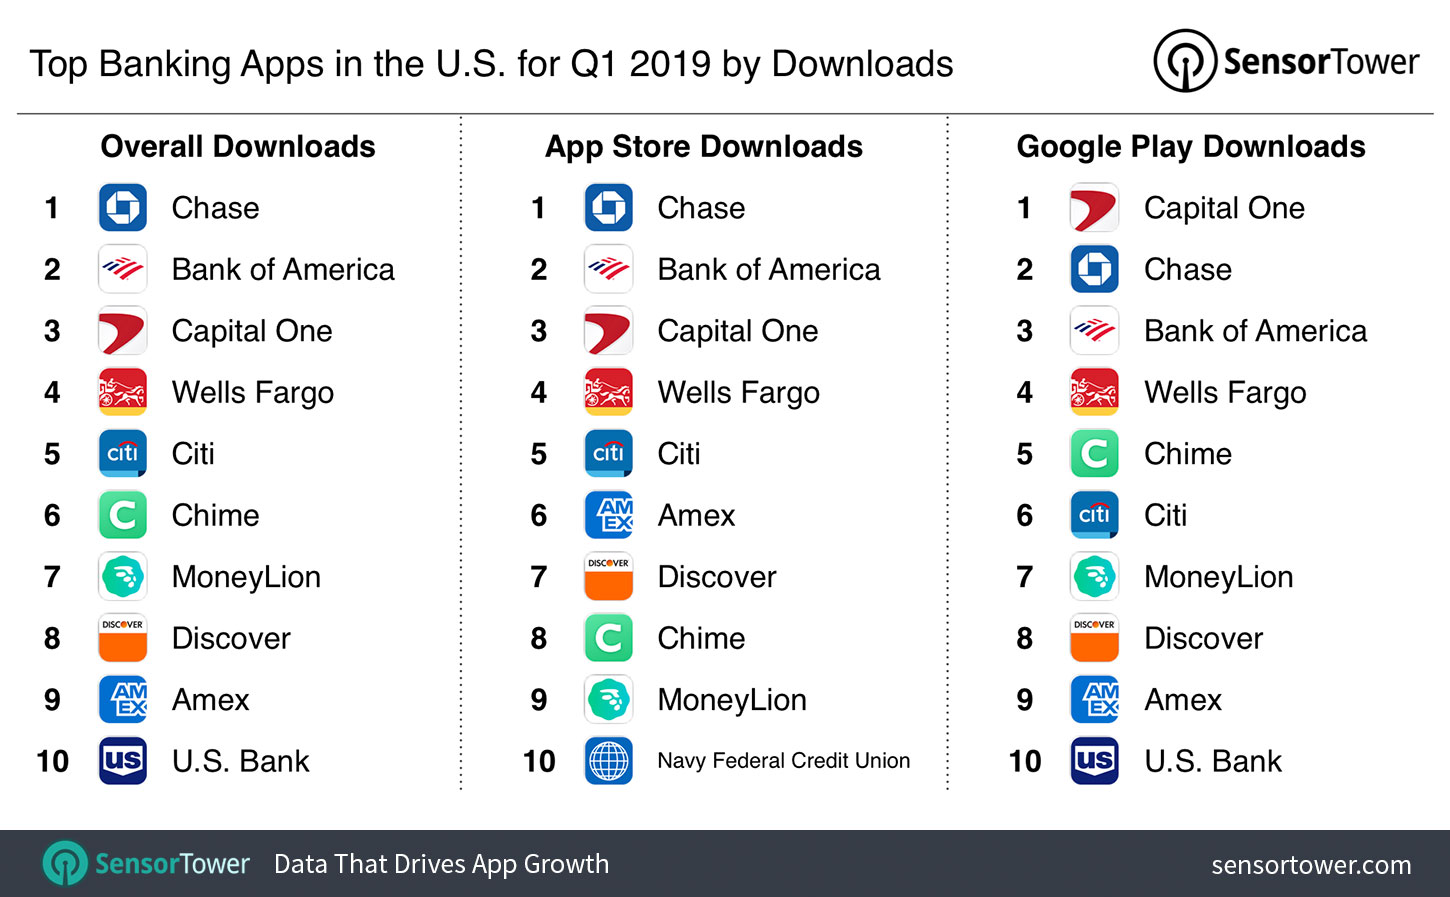 Top Banking Apps in the U.S. for Q1 2019 by Downloads